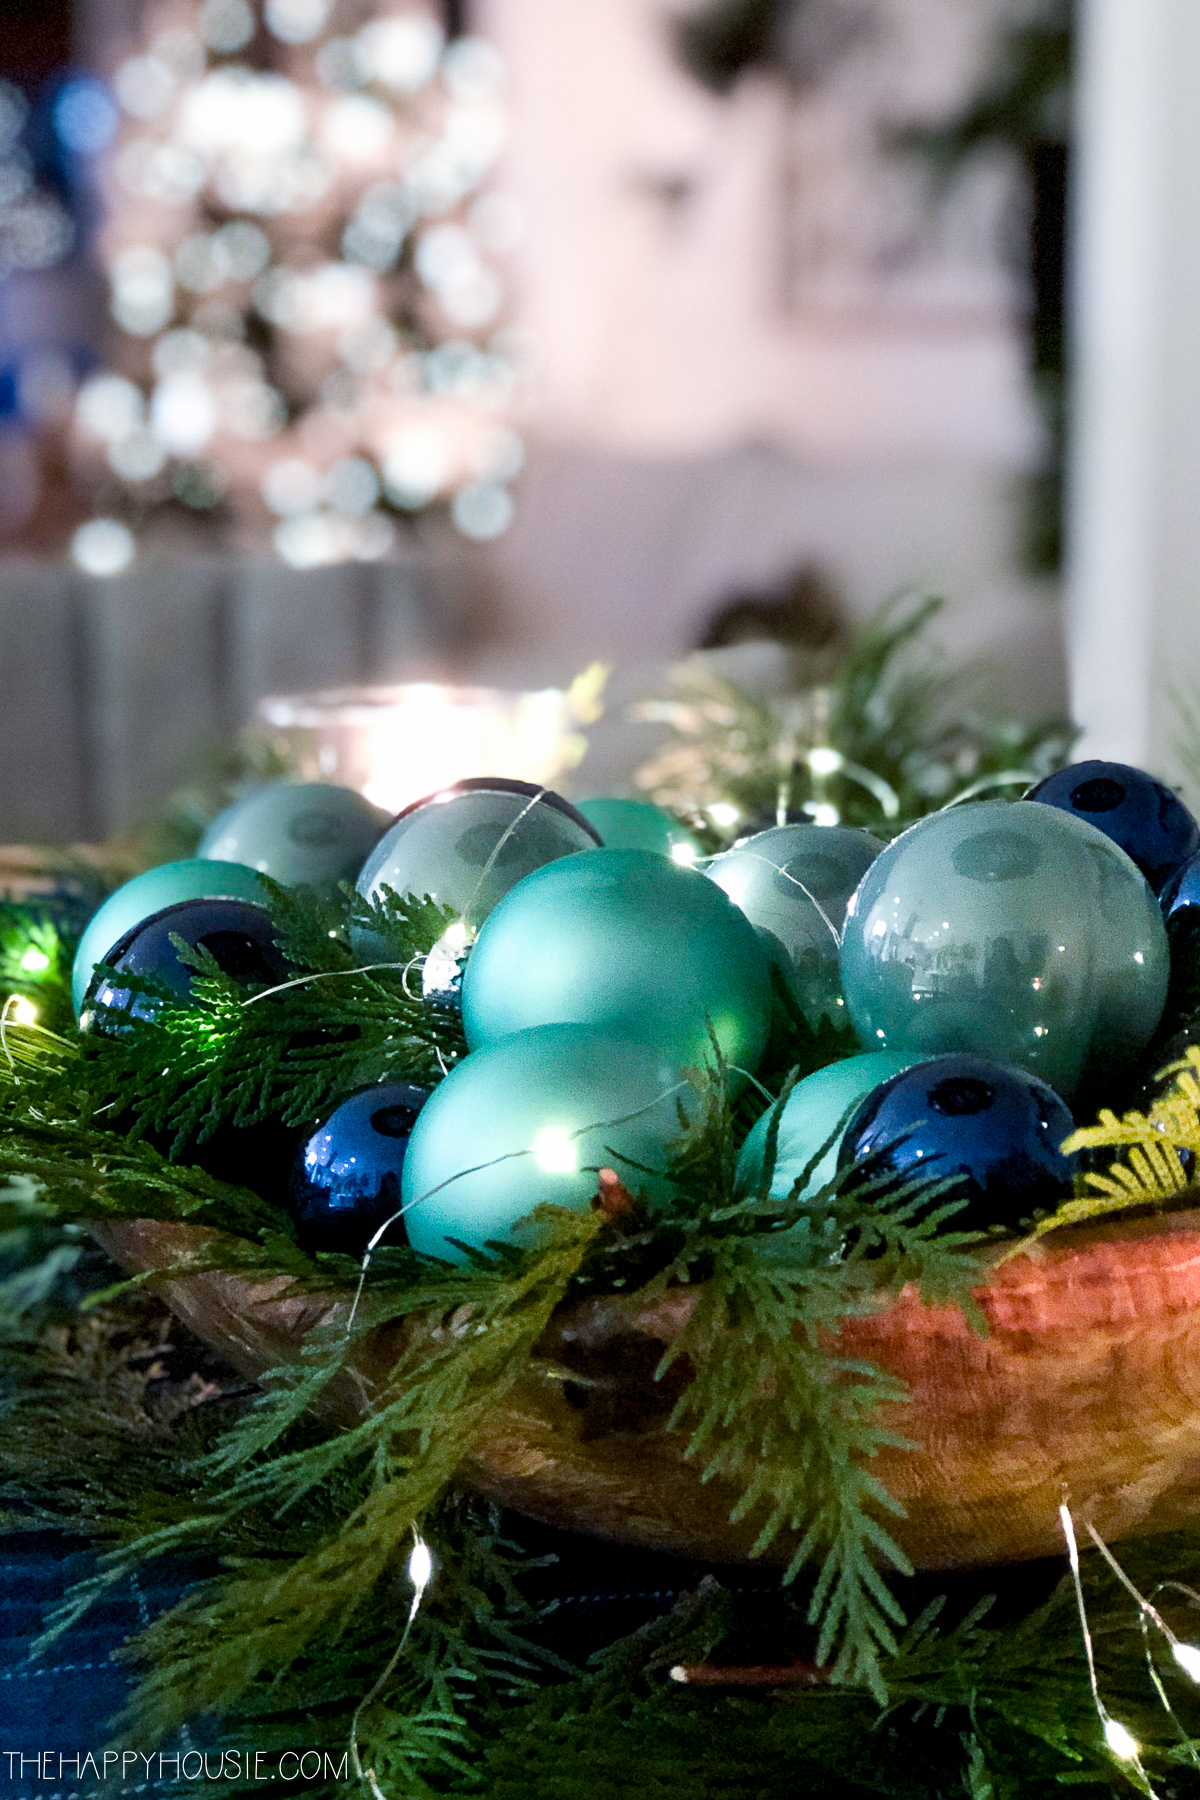 Up close picture of the blue and green ornaments on the table.